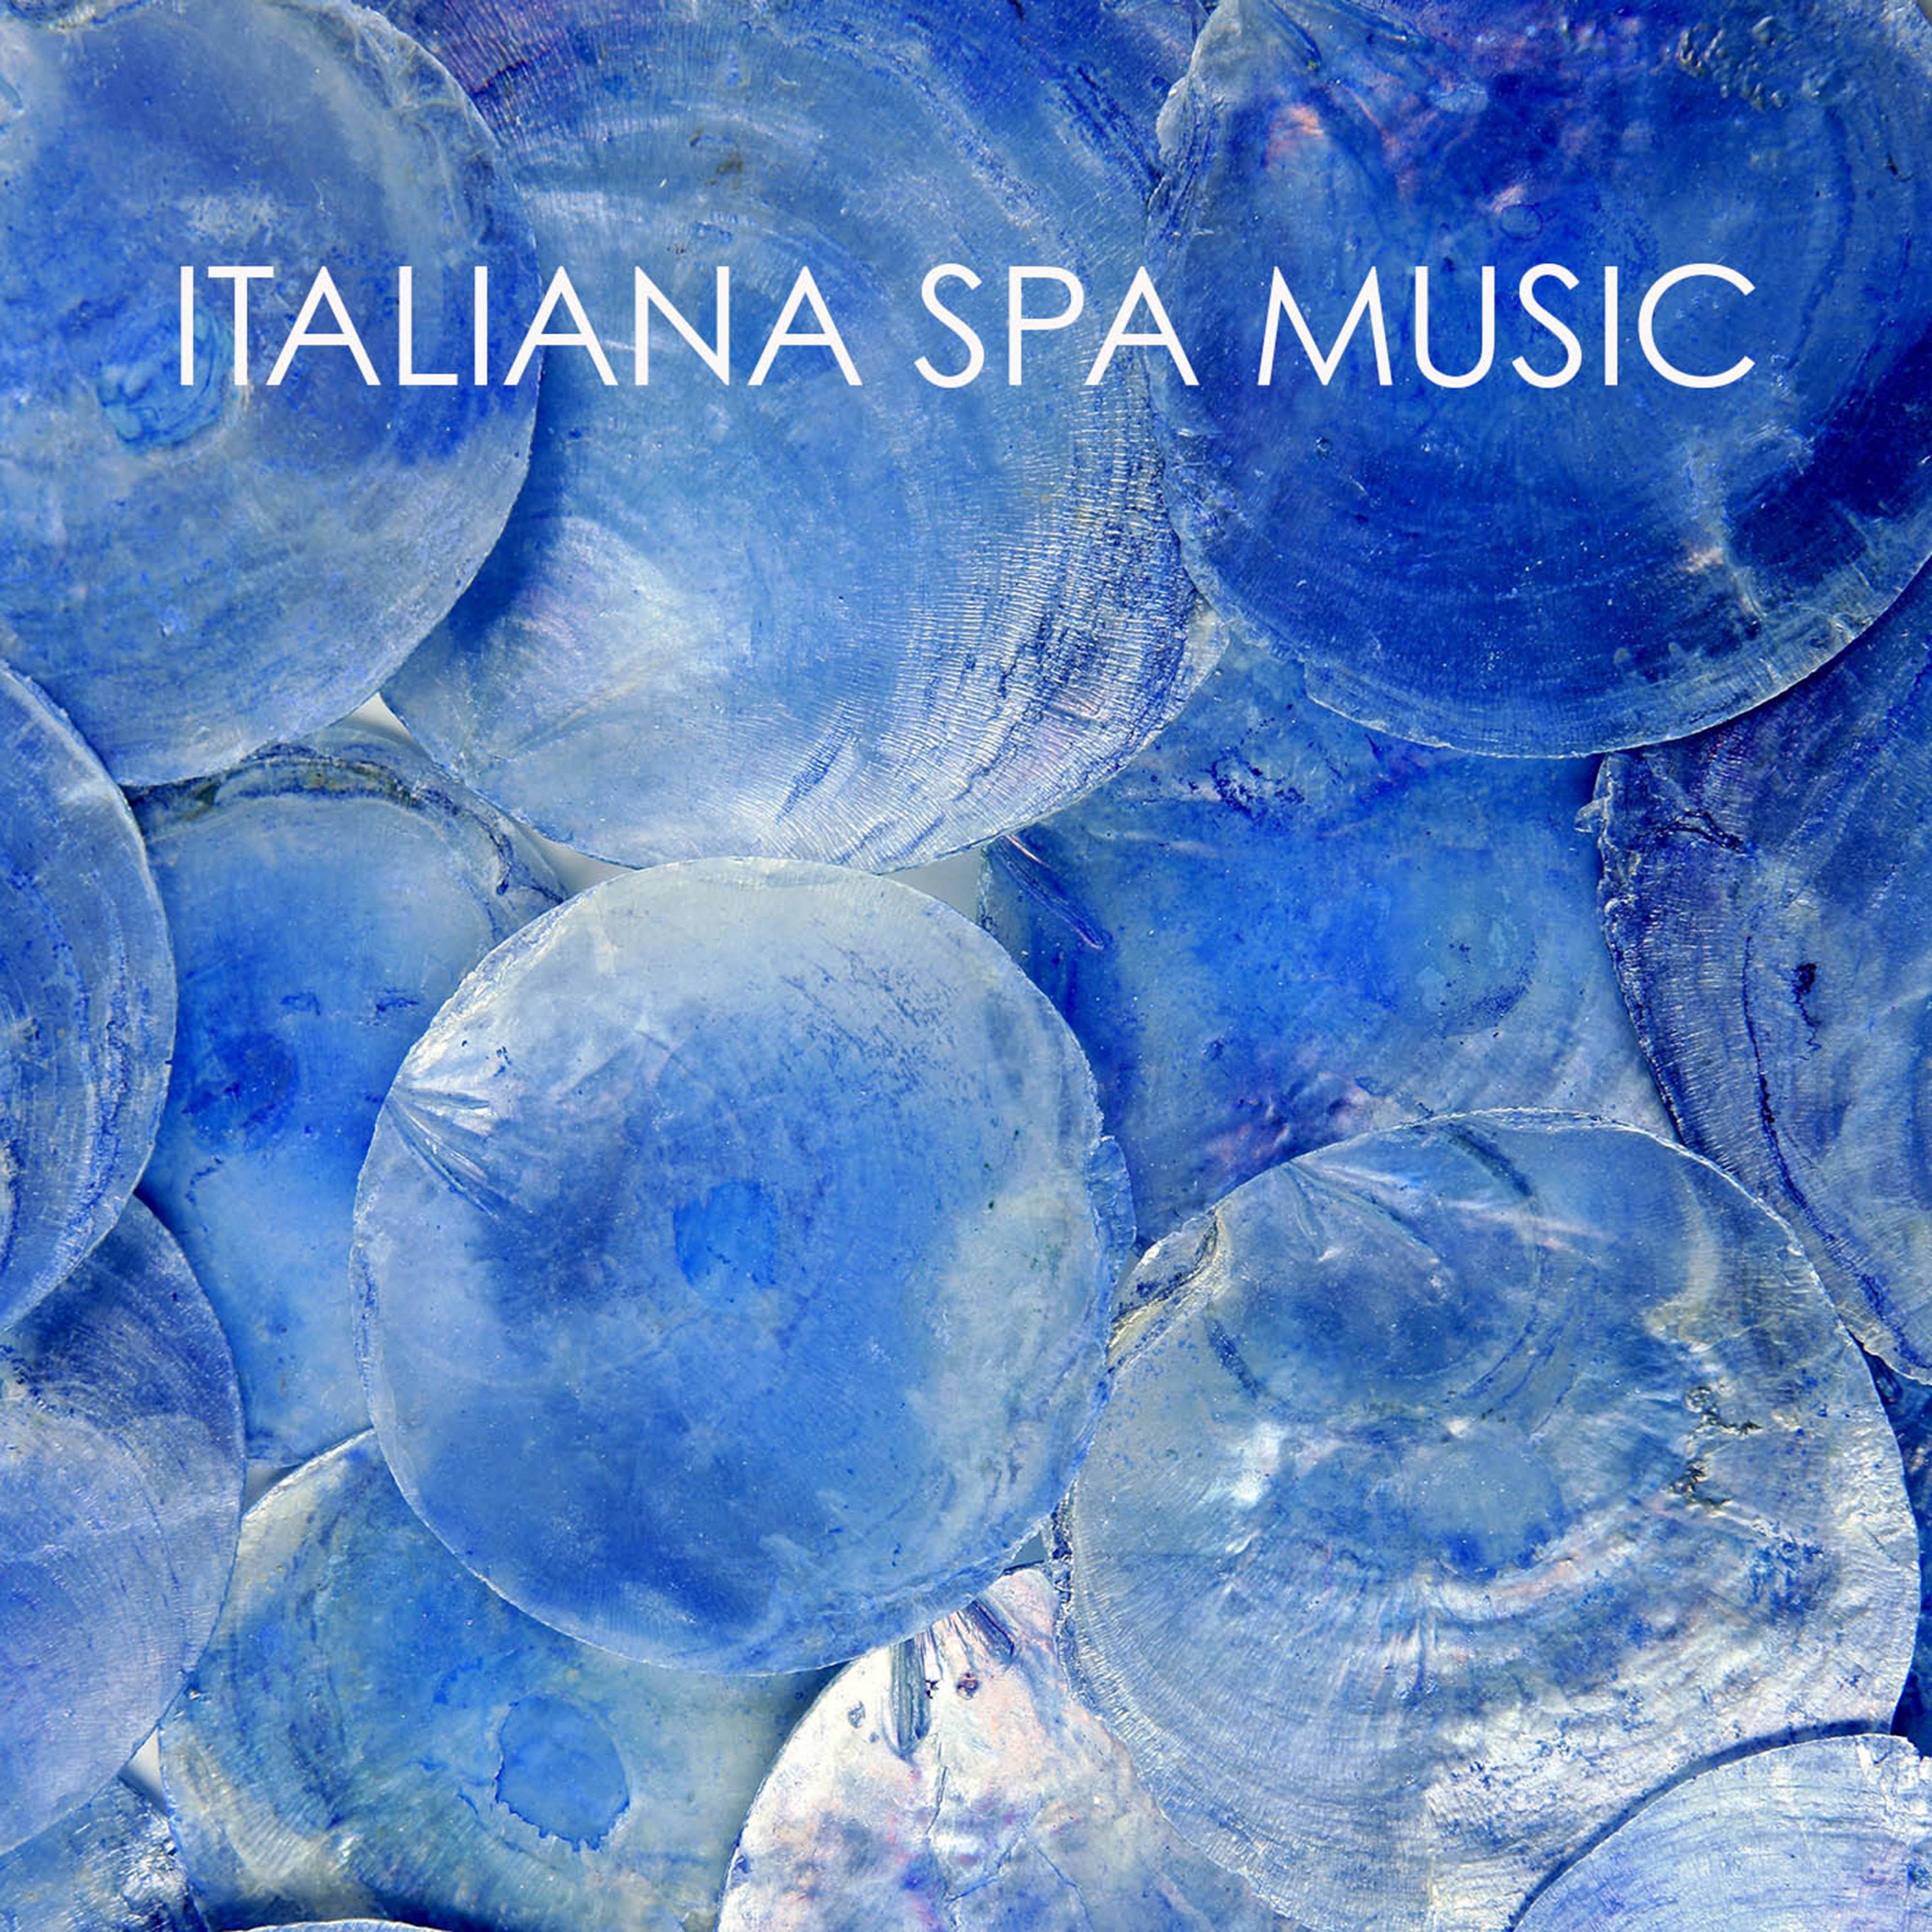 Relaxing Music for Massage and Spa Treatments